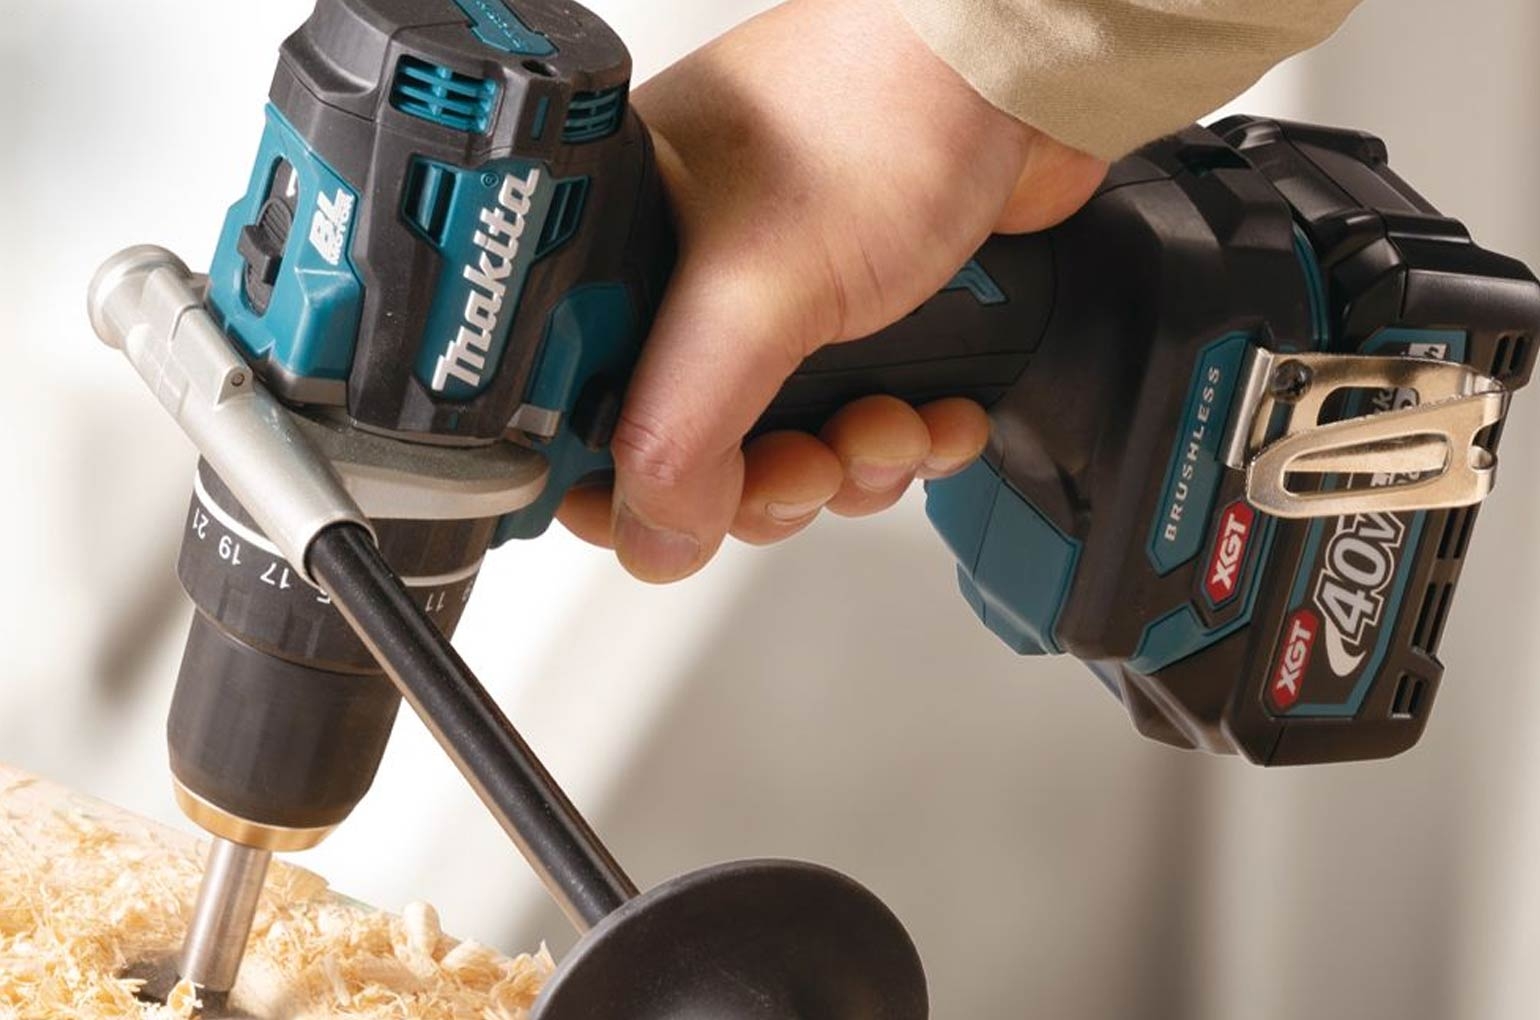 Which brand is better, Dewalt or Makita